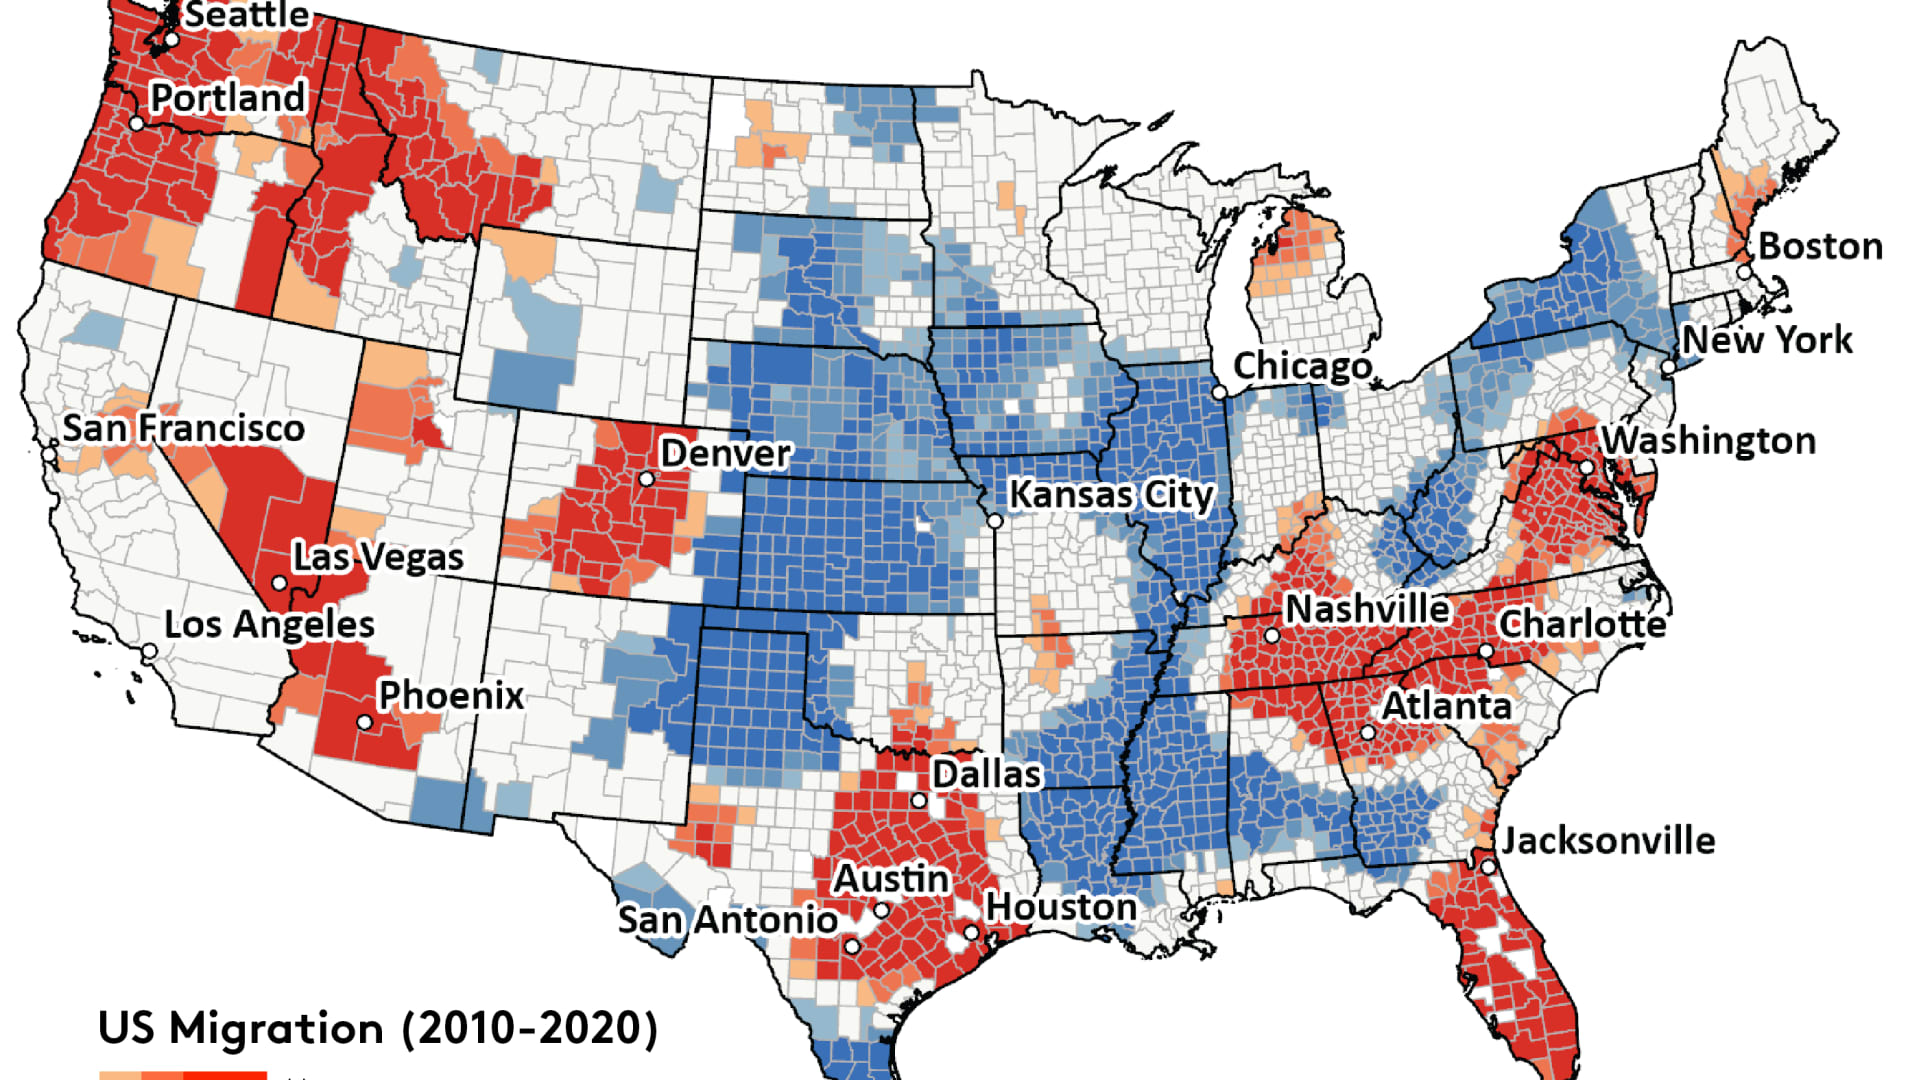 Areas where more people moved into a region than out are red. Areas where more people moved out of a region than in are in blue. 